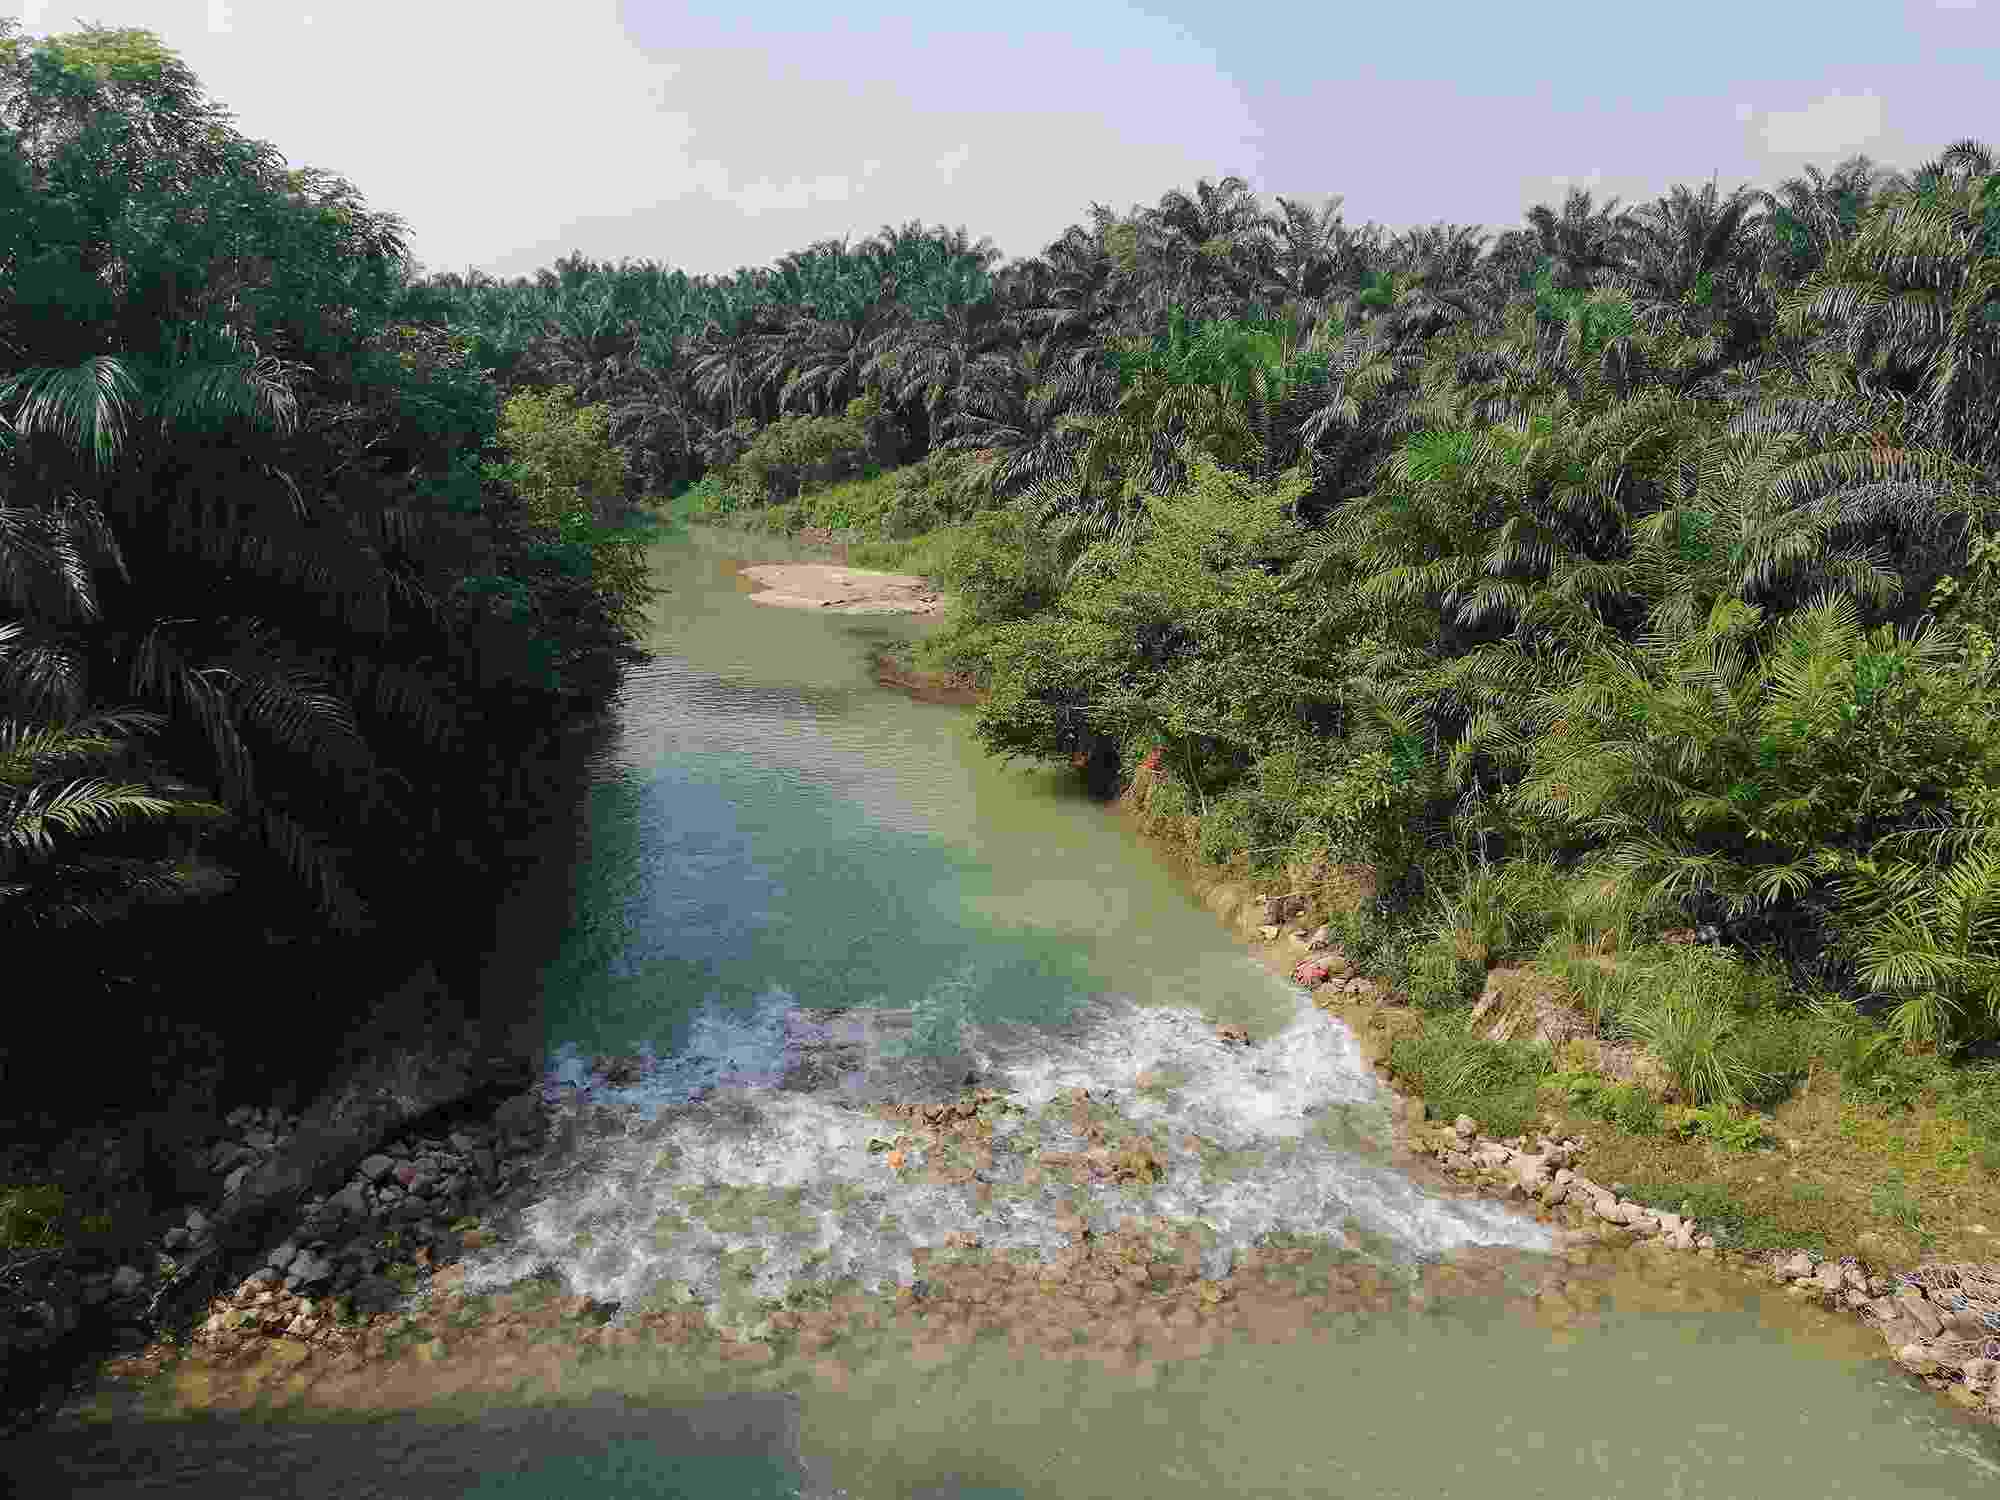 Panoramic photo of the Sg Penggeli River, a tributary of the Sg Johor River, flanked by lush greenery and palm trees